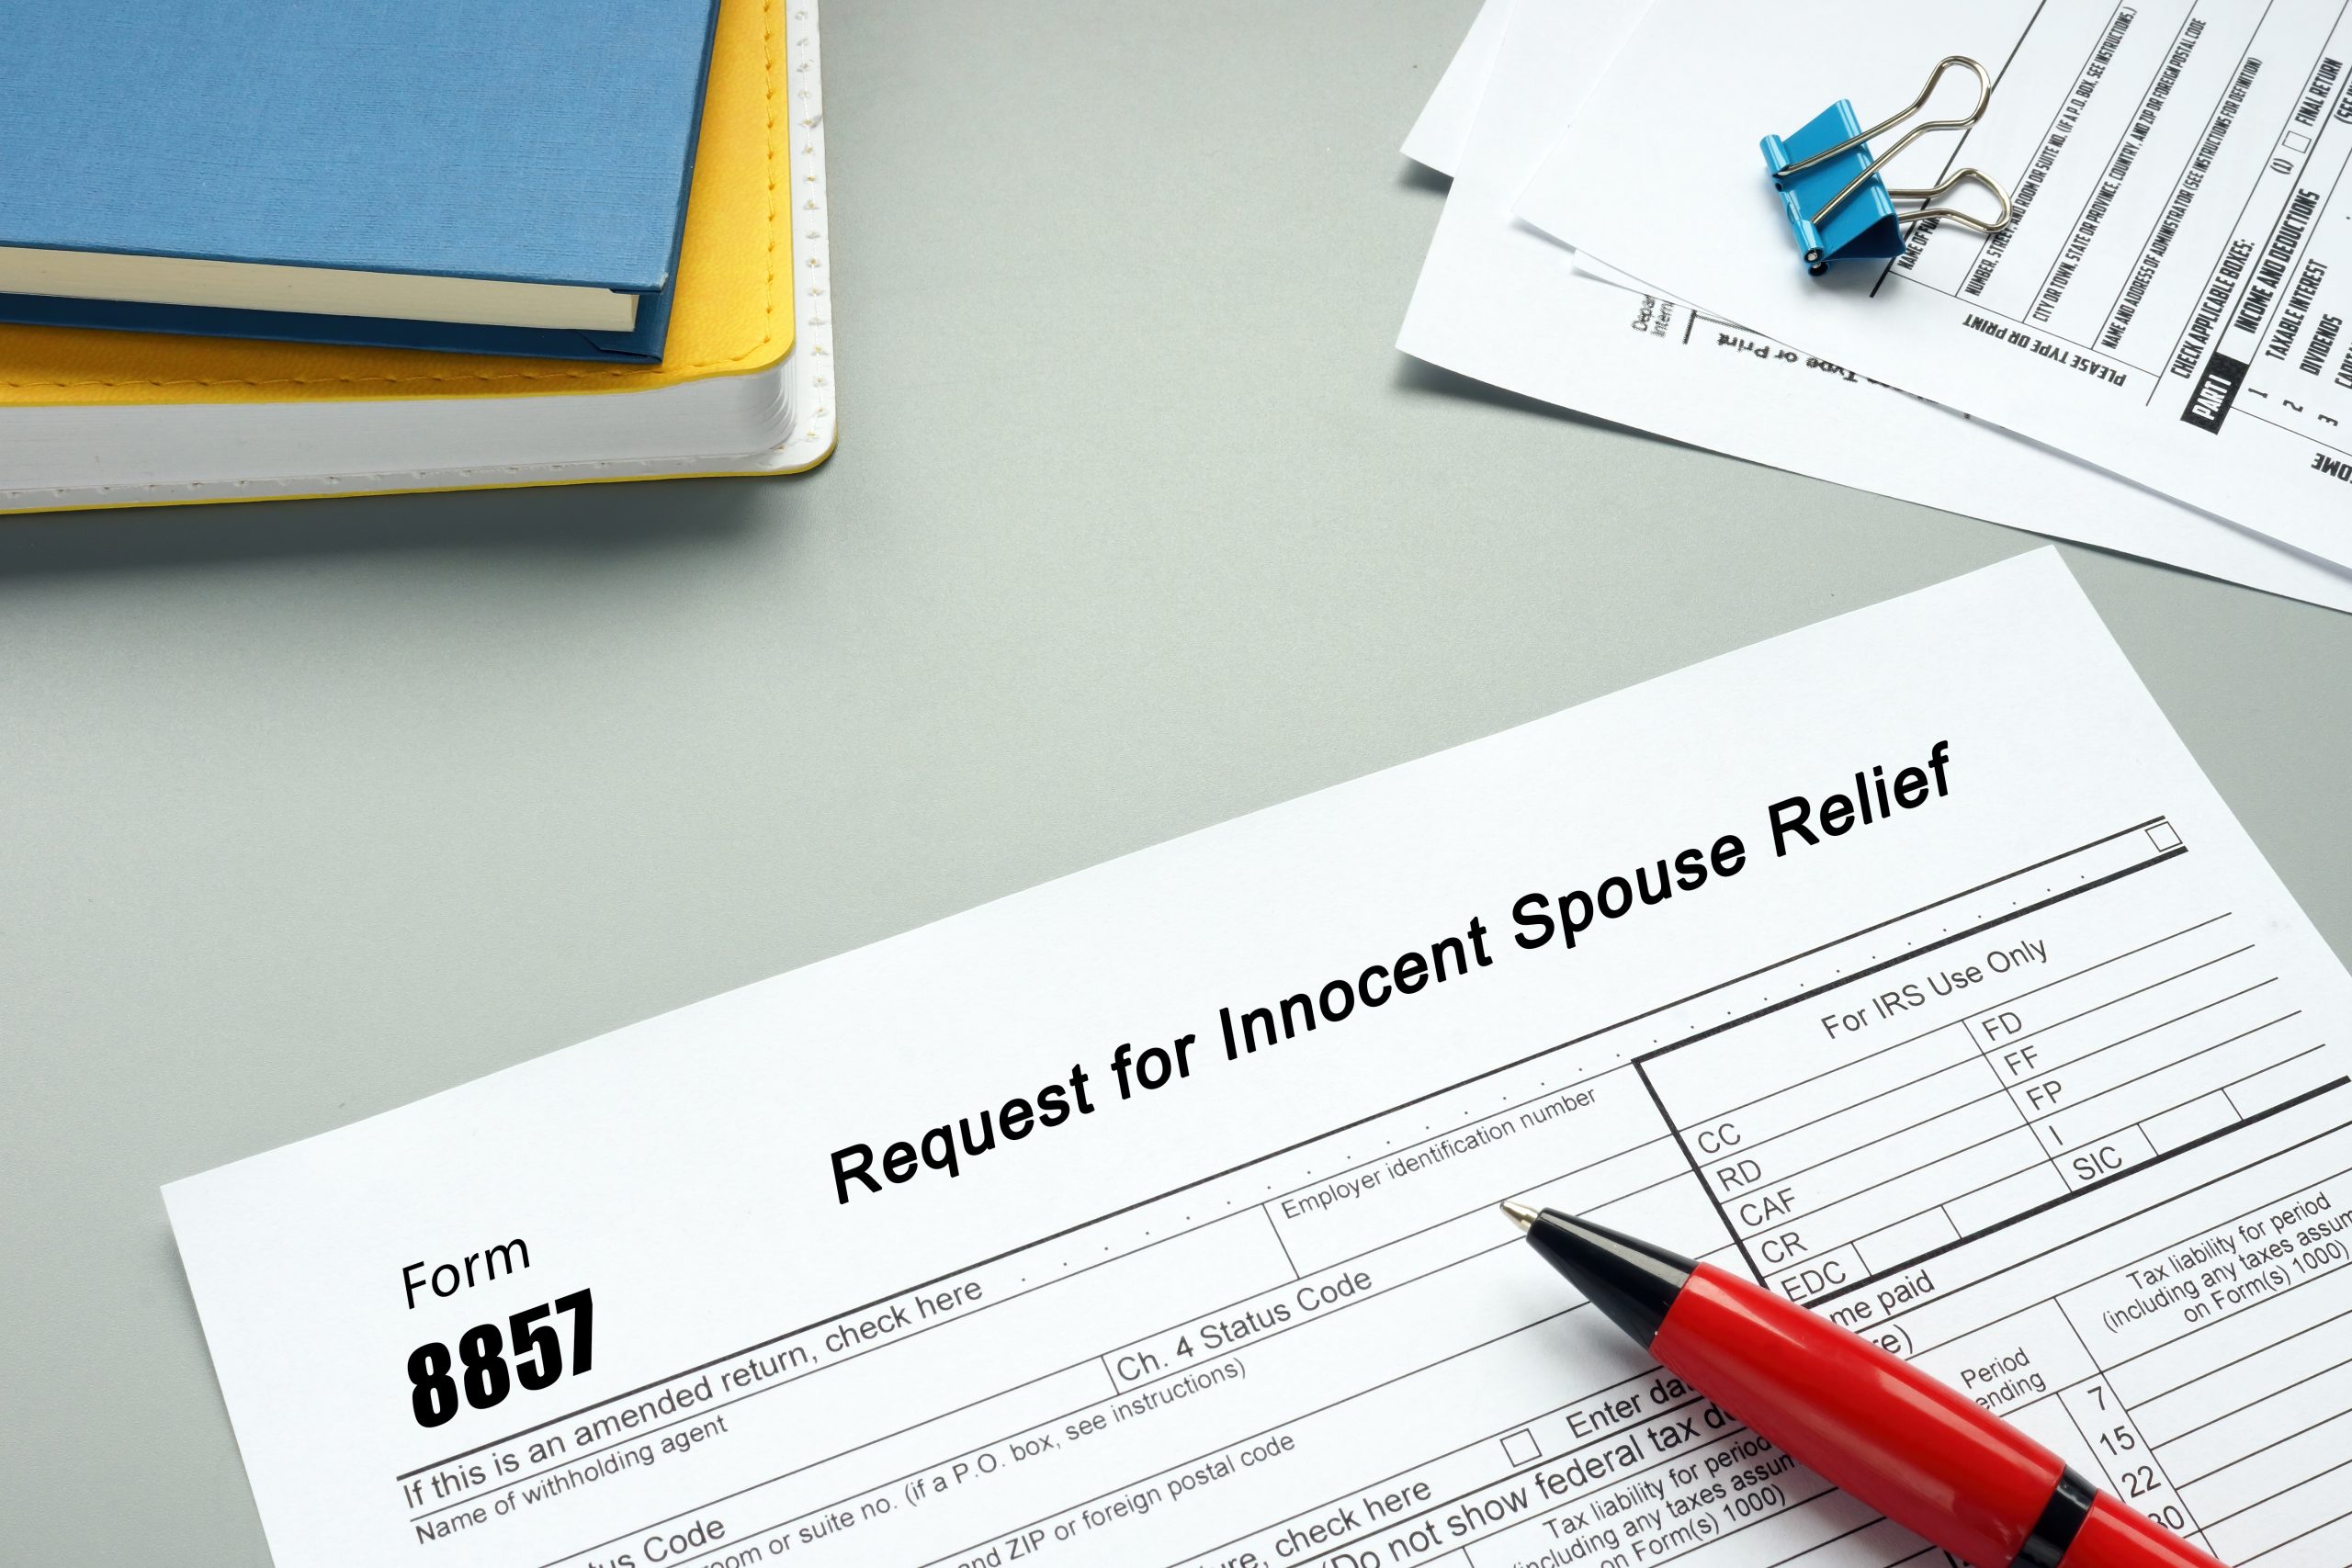 Innocent Spouse: Joint vs. separate filing impact.